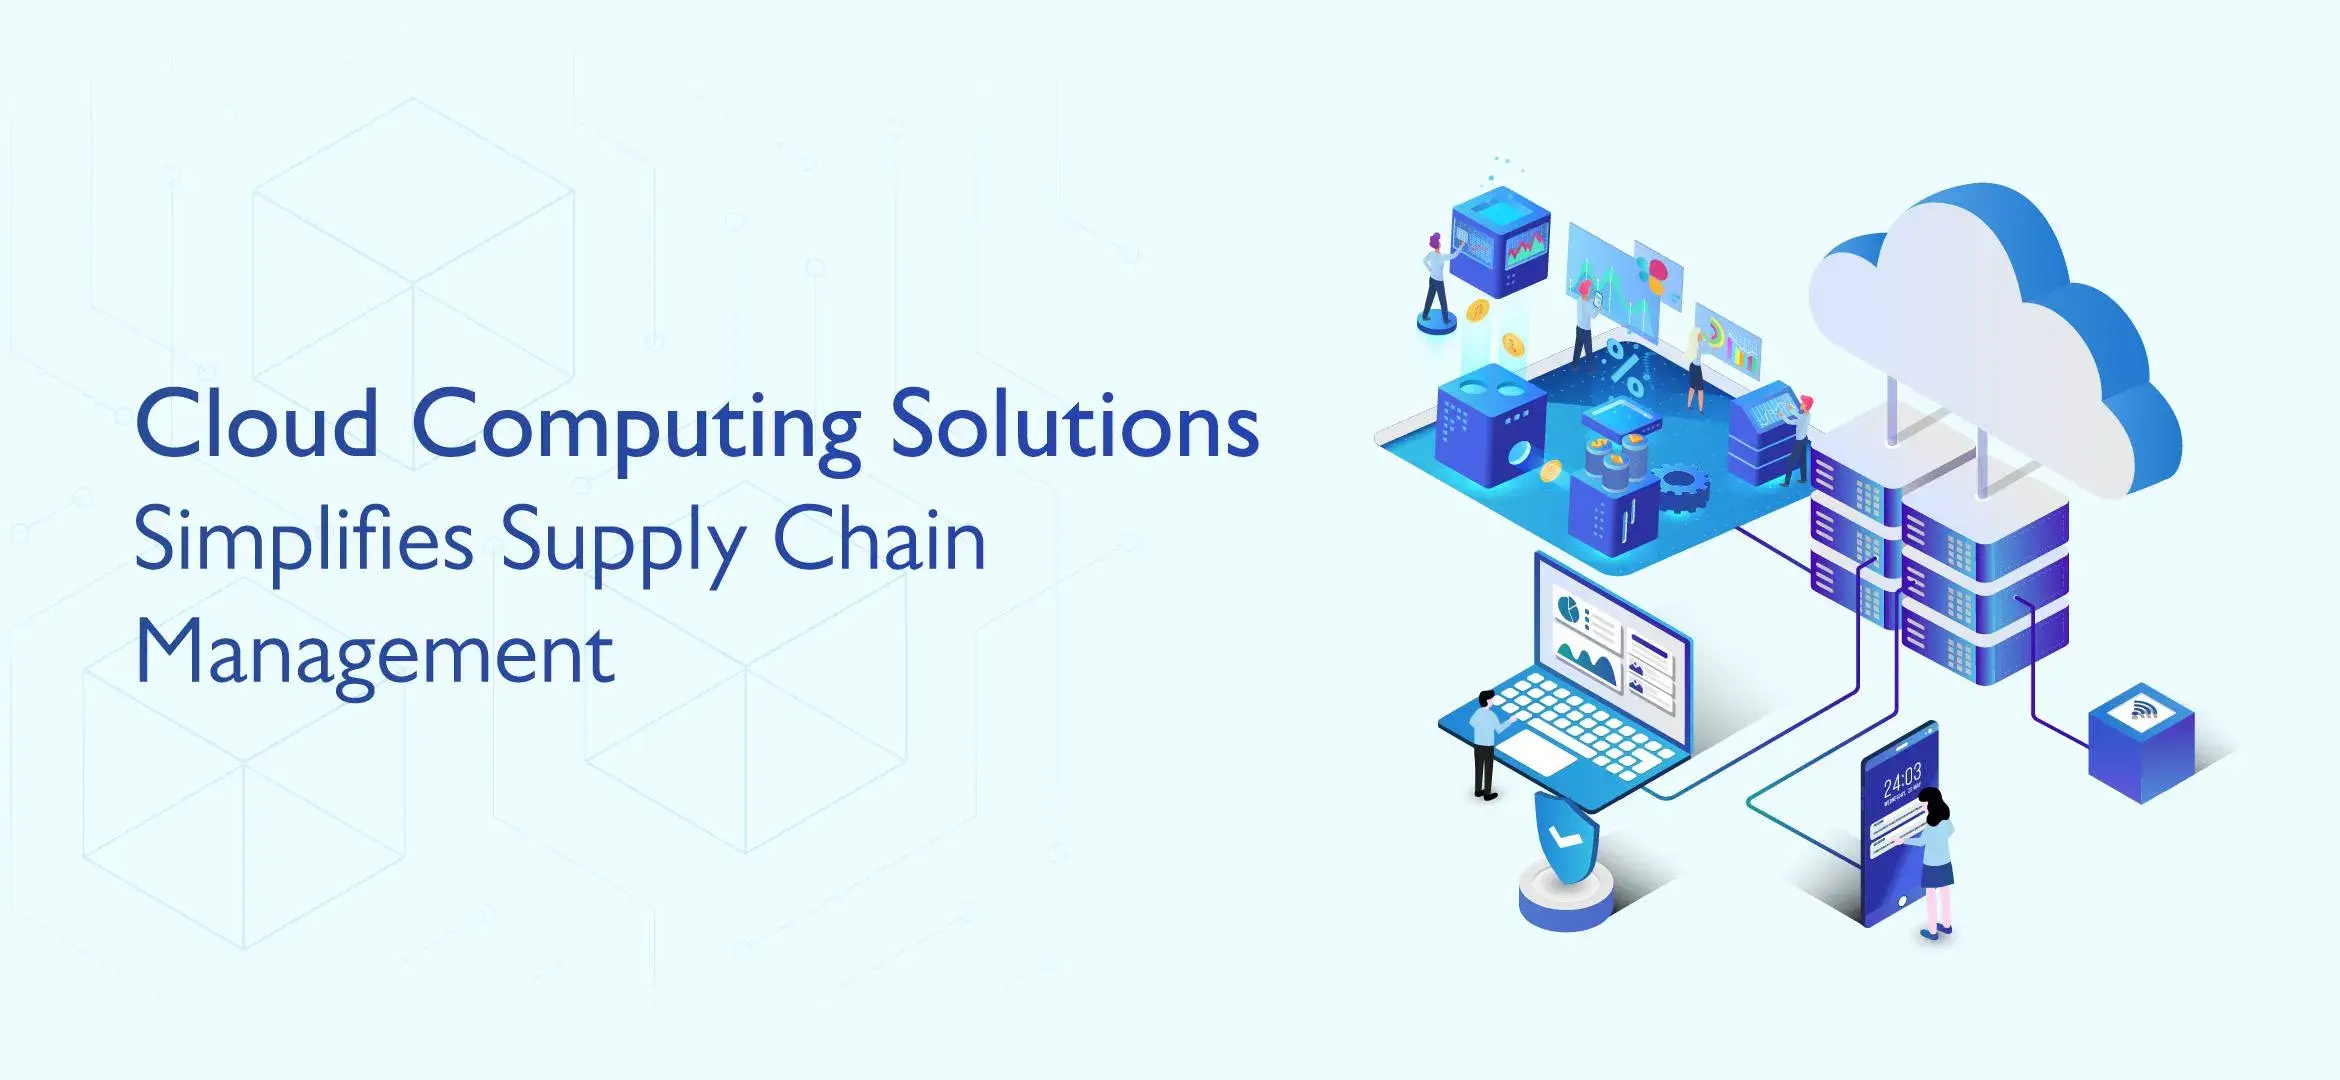 1712232498Cloud Computing Solutions Simplify Supply Chain Management.webp